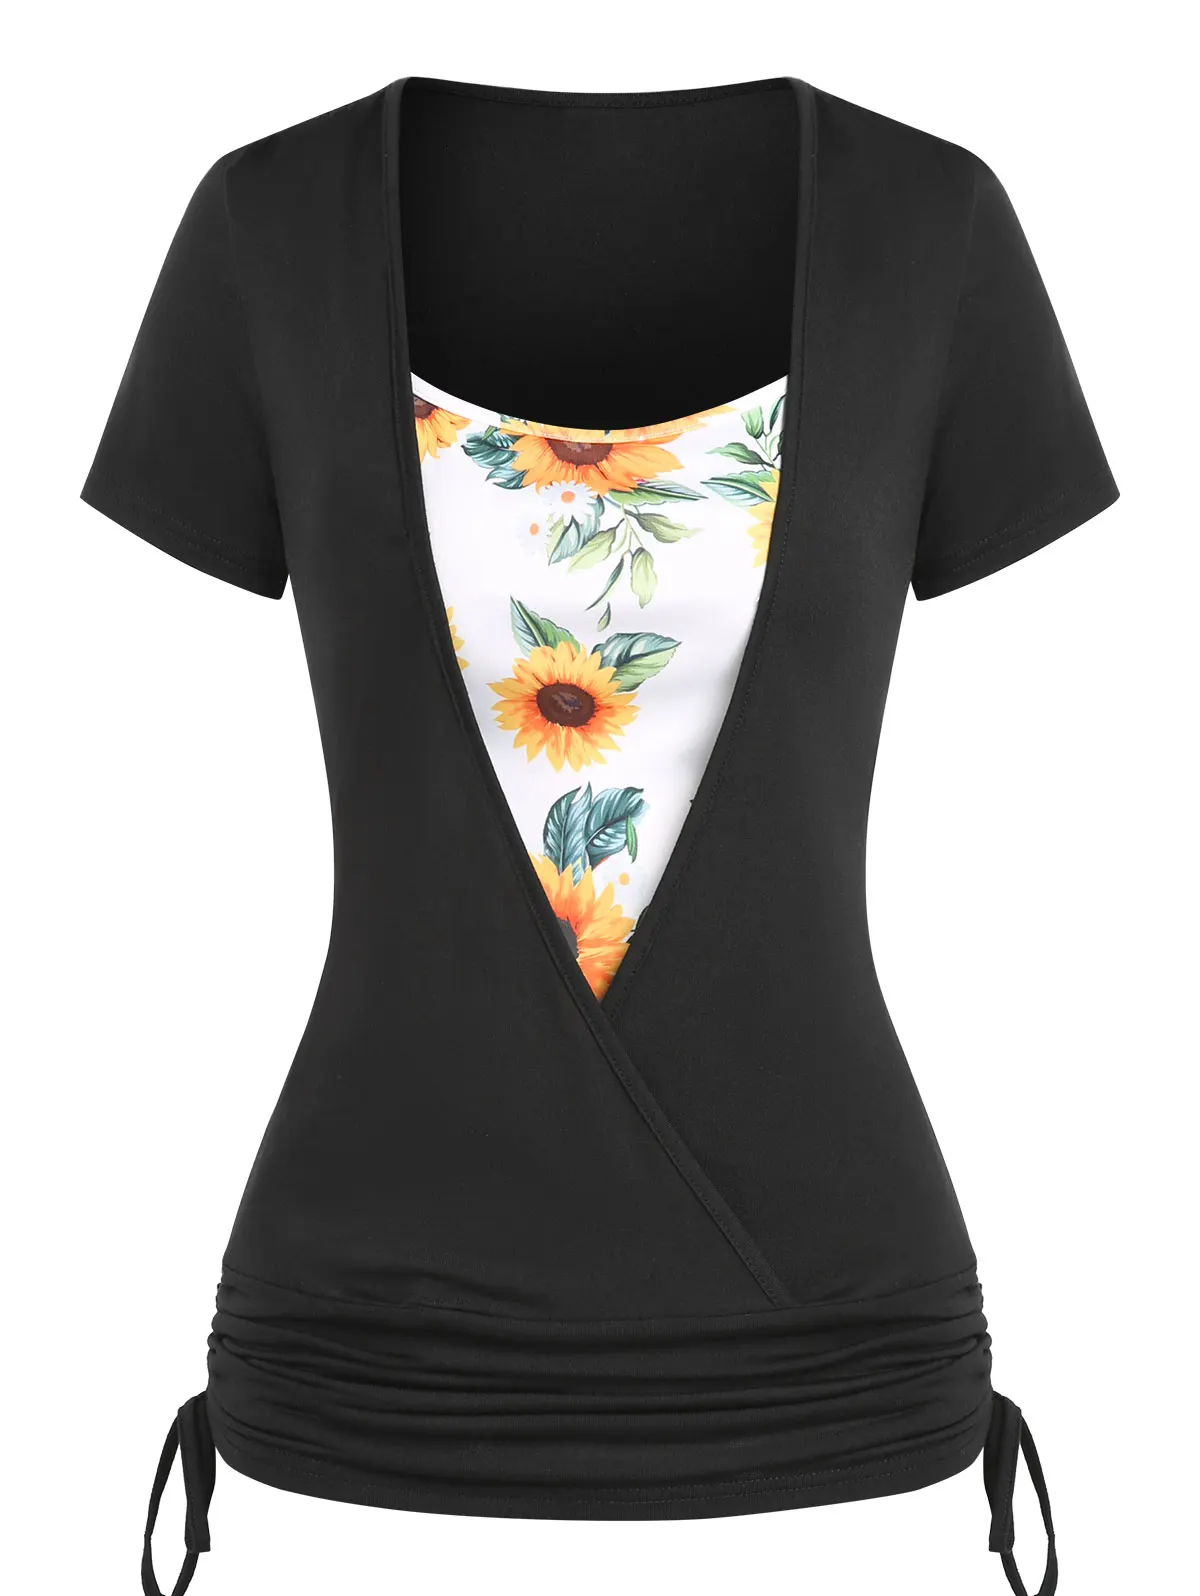 Short Sleeve Tie Flower Print T-Shirt New Fashion Casual Tee Women T Shirt Twofer Top 2 In 1 Surplice Cinched T-Shirts